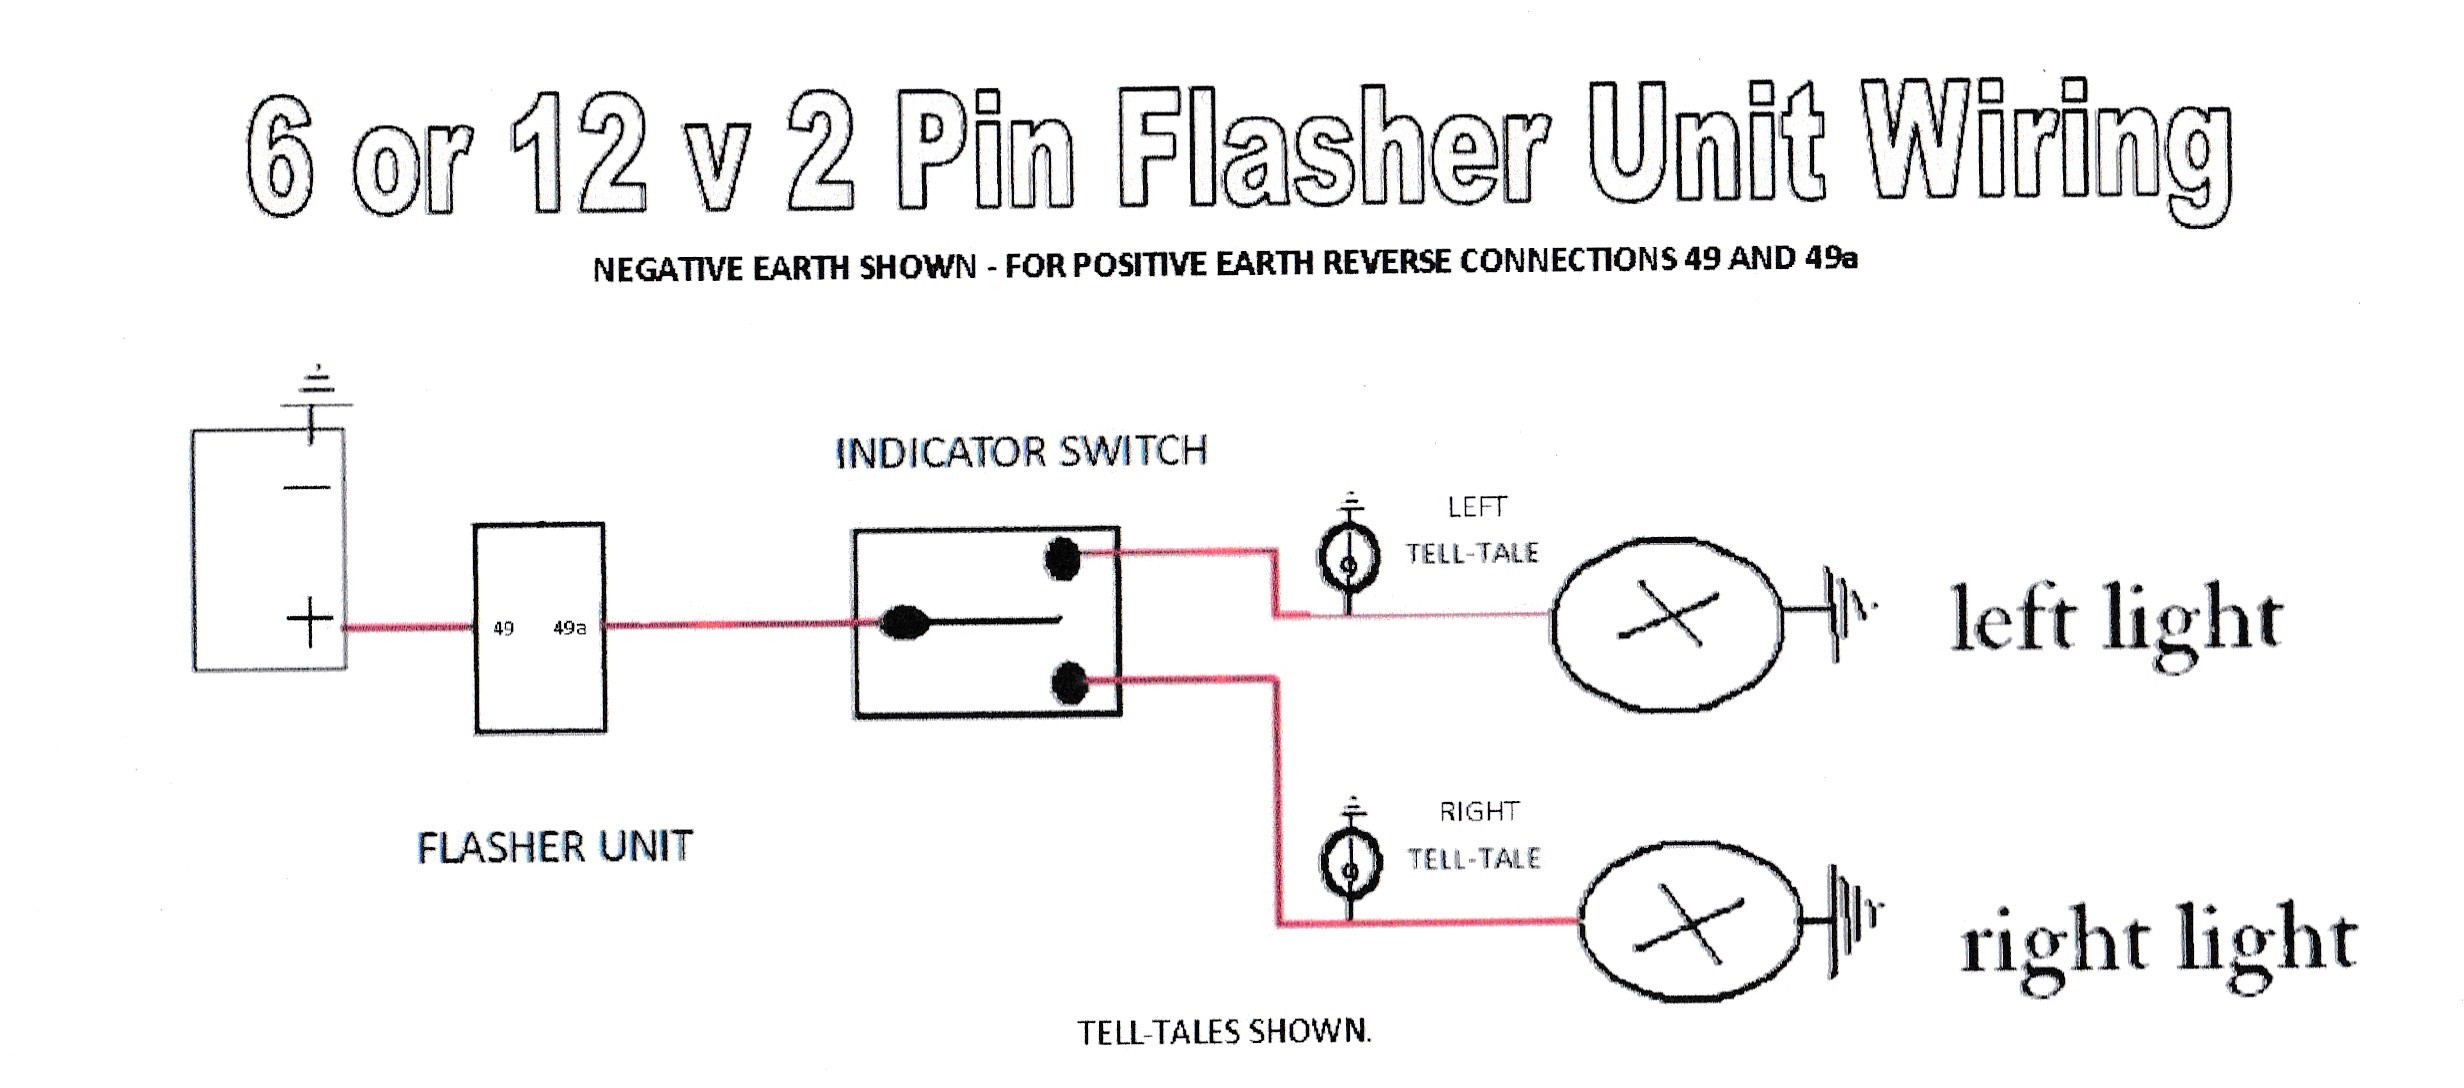 Wiring Diagrams To Assist You With Connecting Up 2 Pin Flasher Relay Diagram And